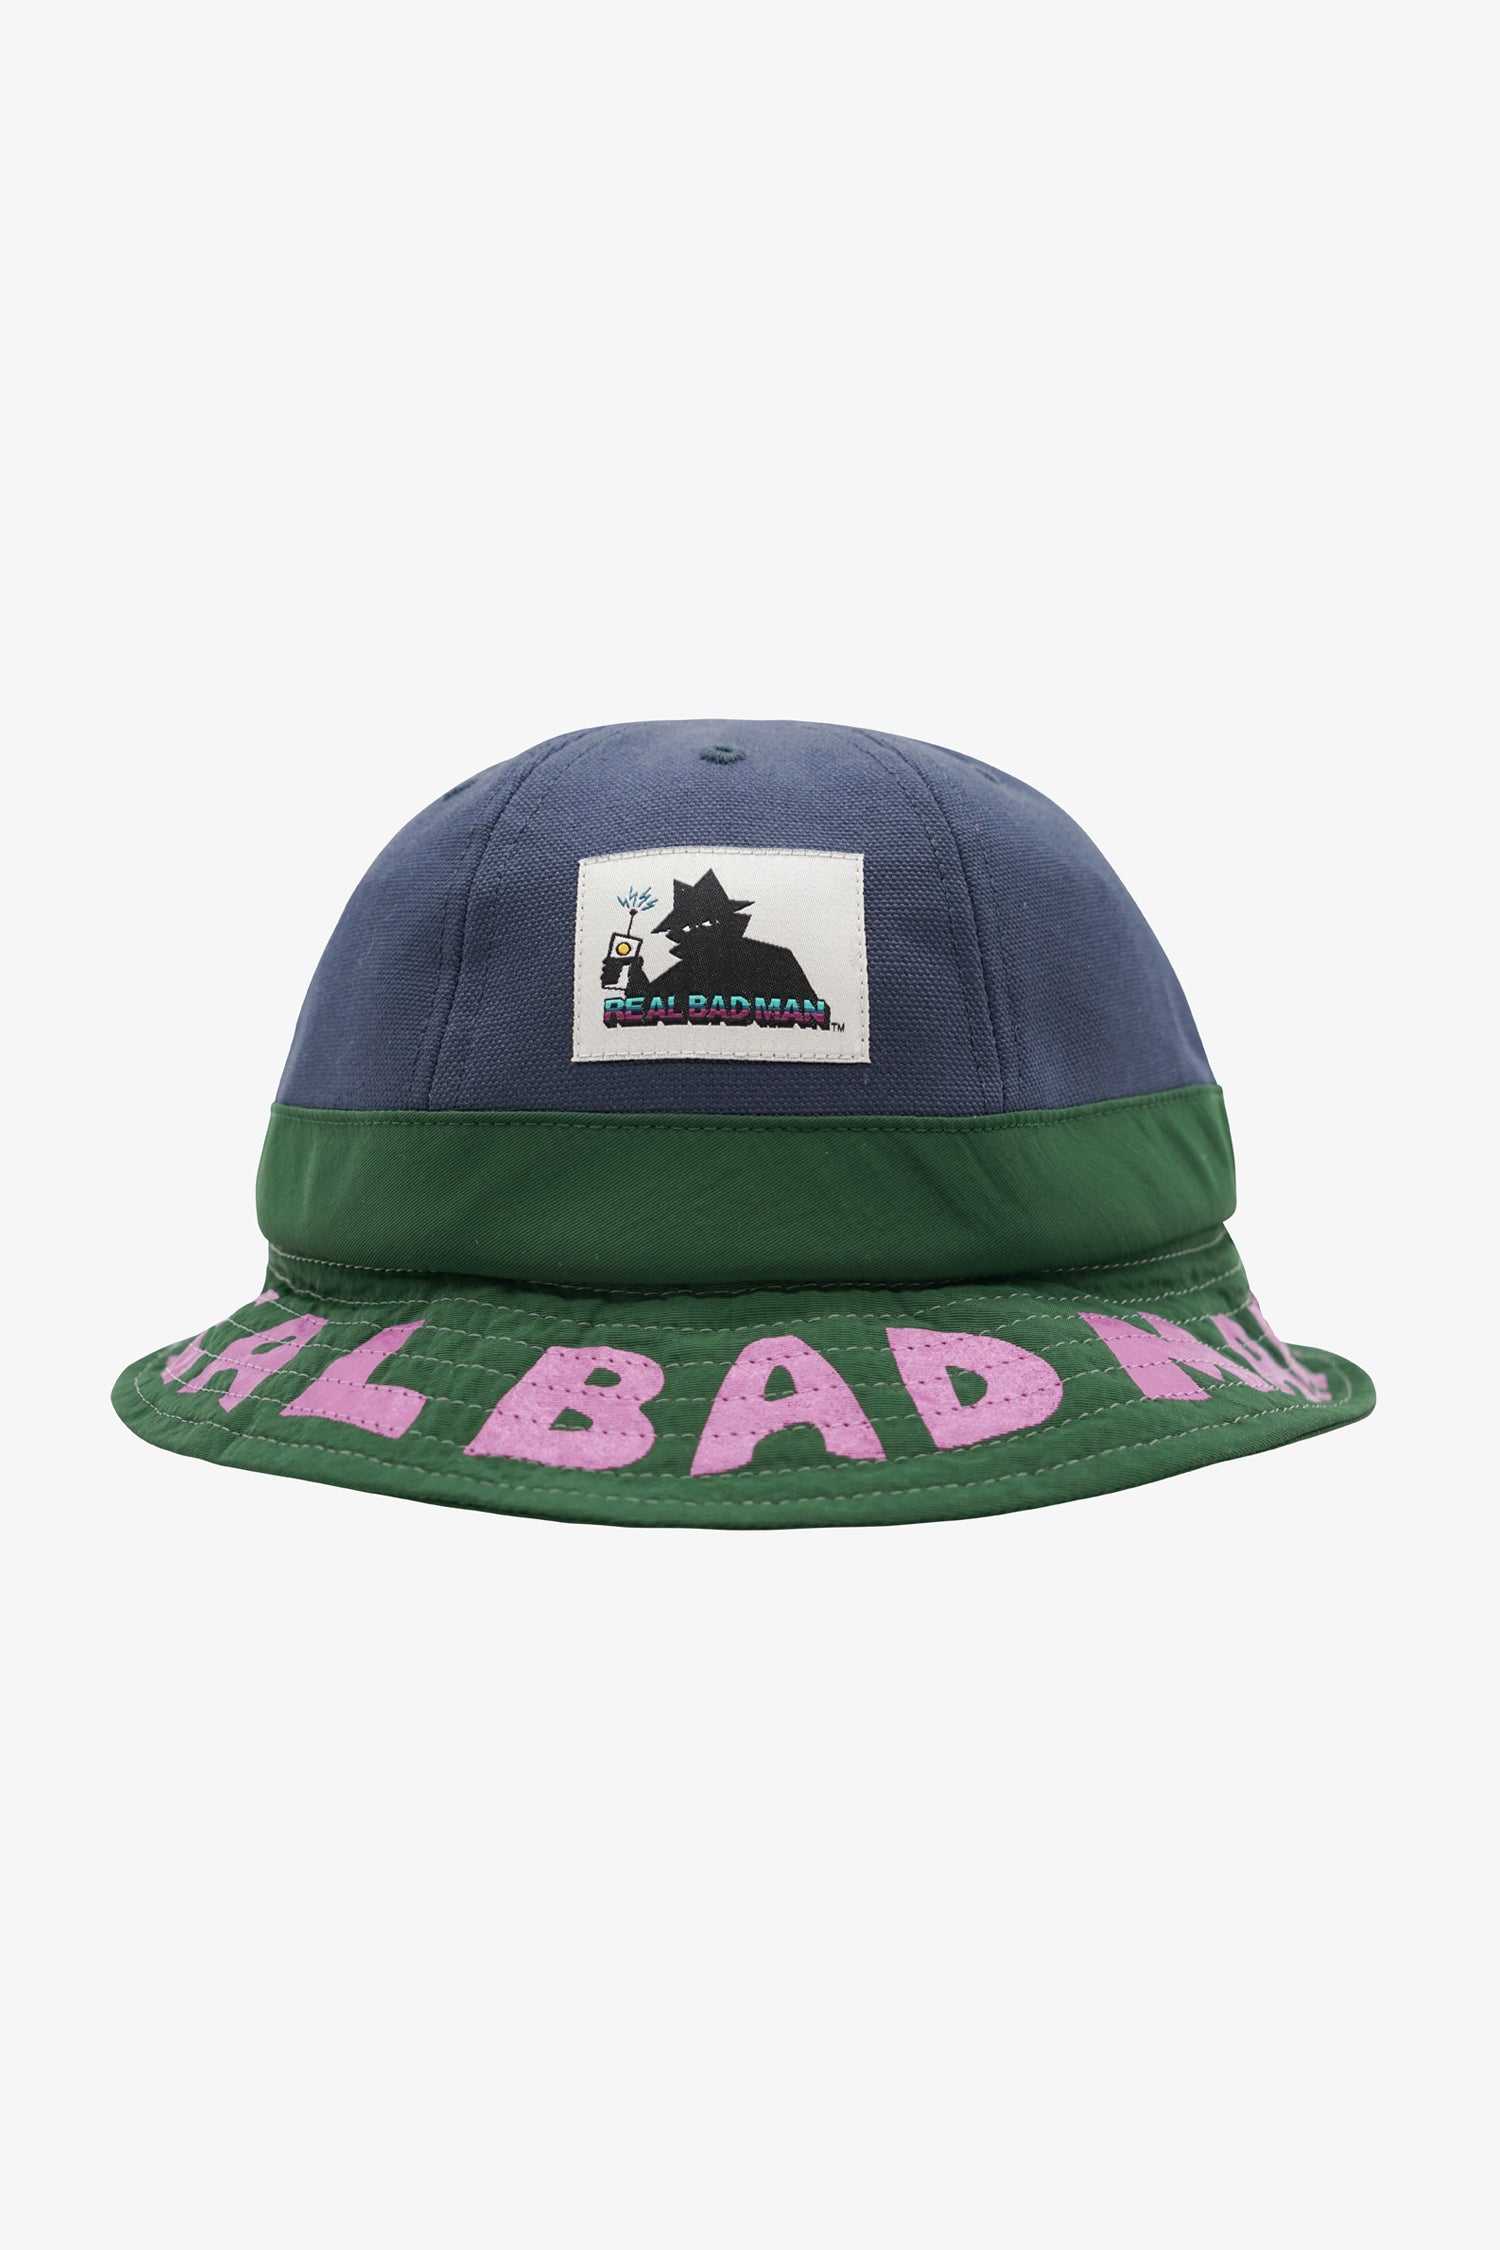 Selectshop FRAME - REAL BAD MAN Duo Toned Bell Bucket Hat All-Accessories Dubai